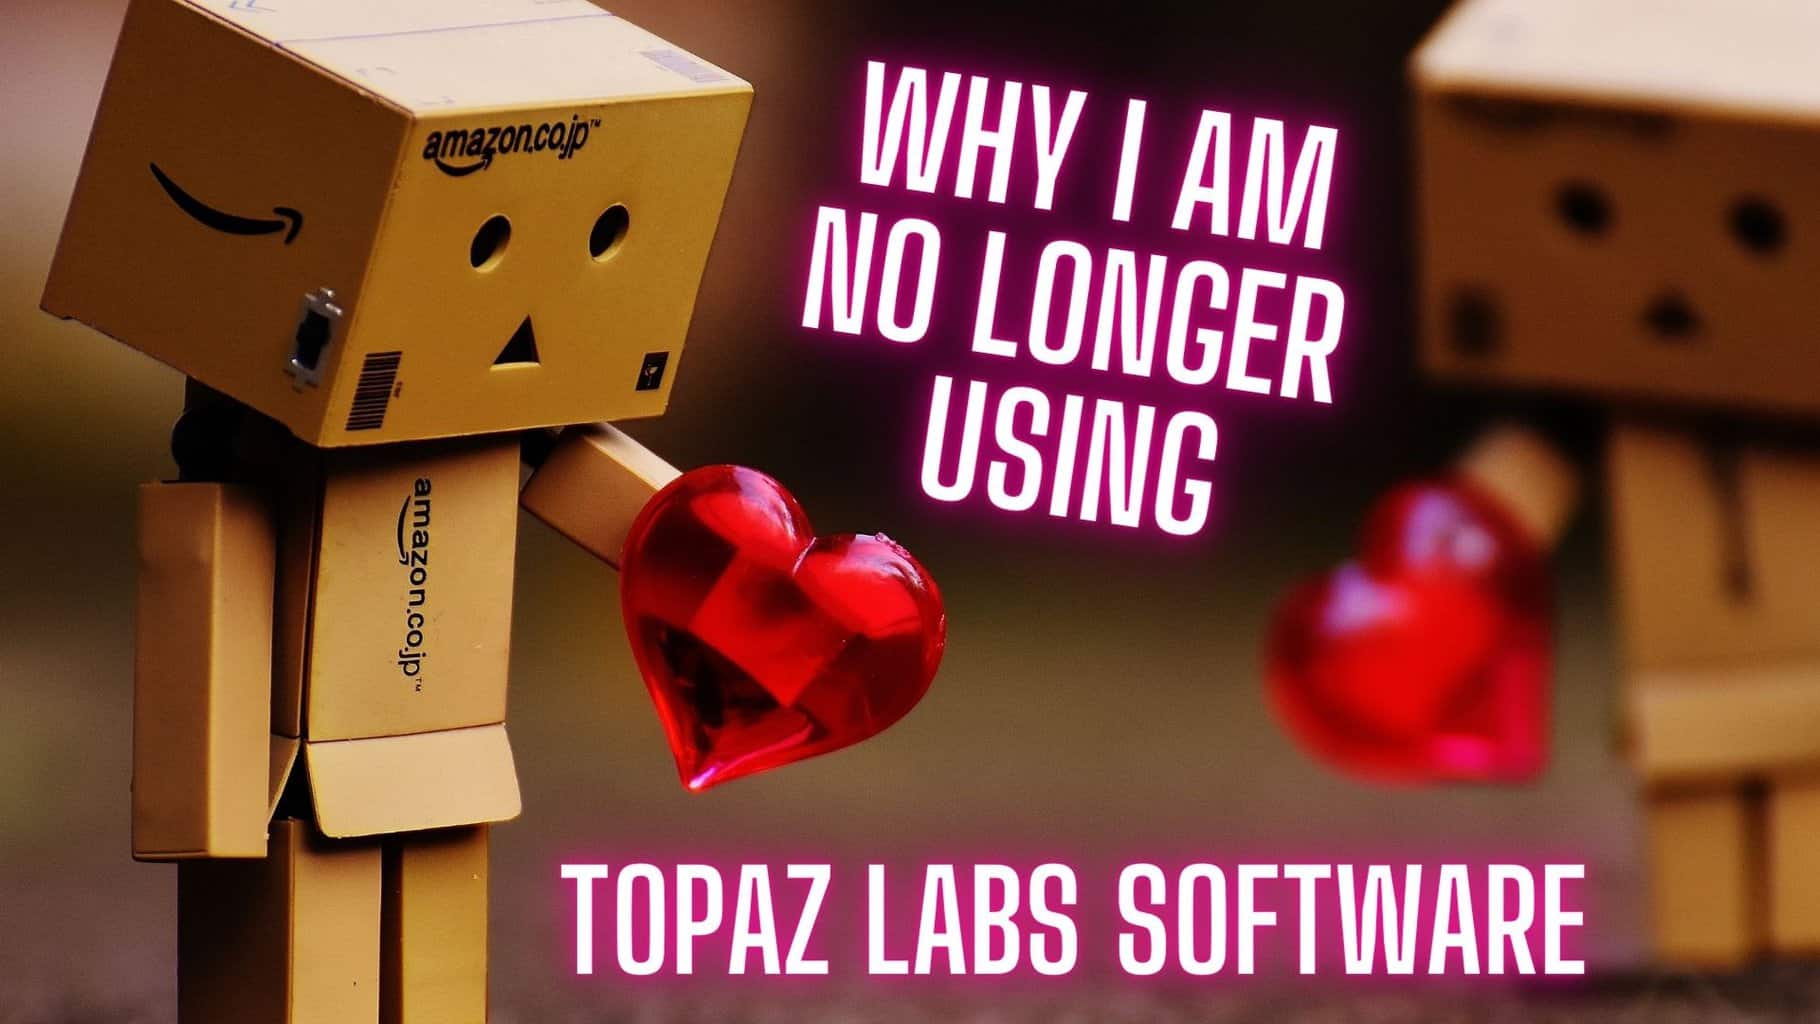 Why I am no longer using Topaz Labs Software.